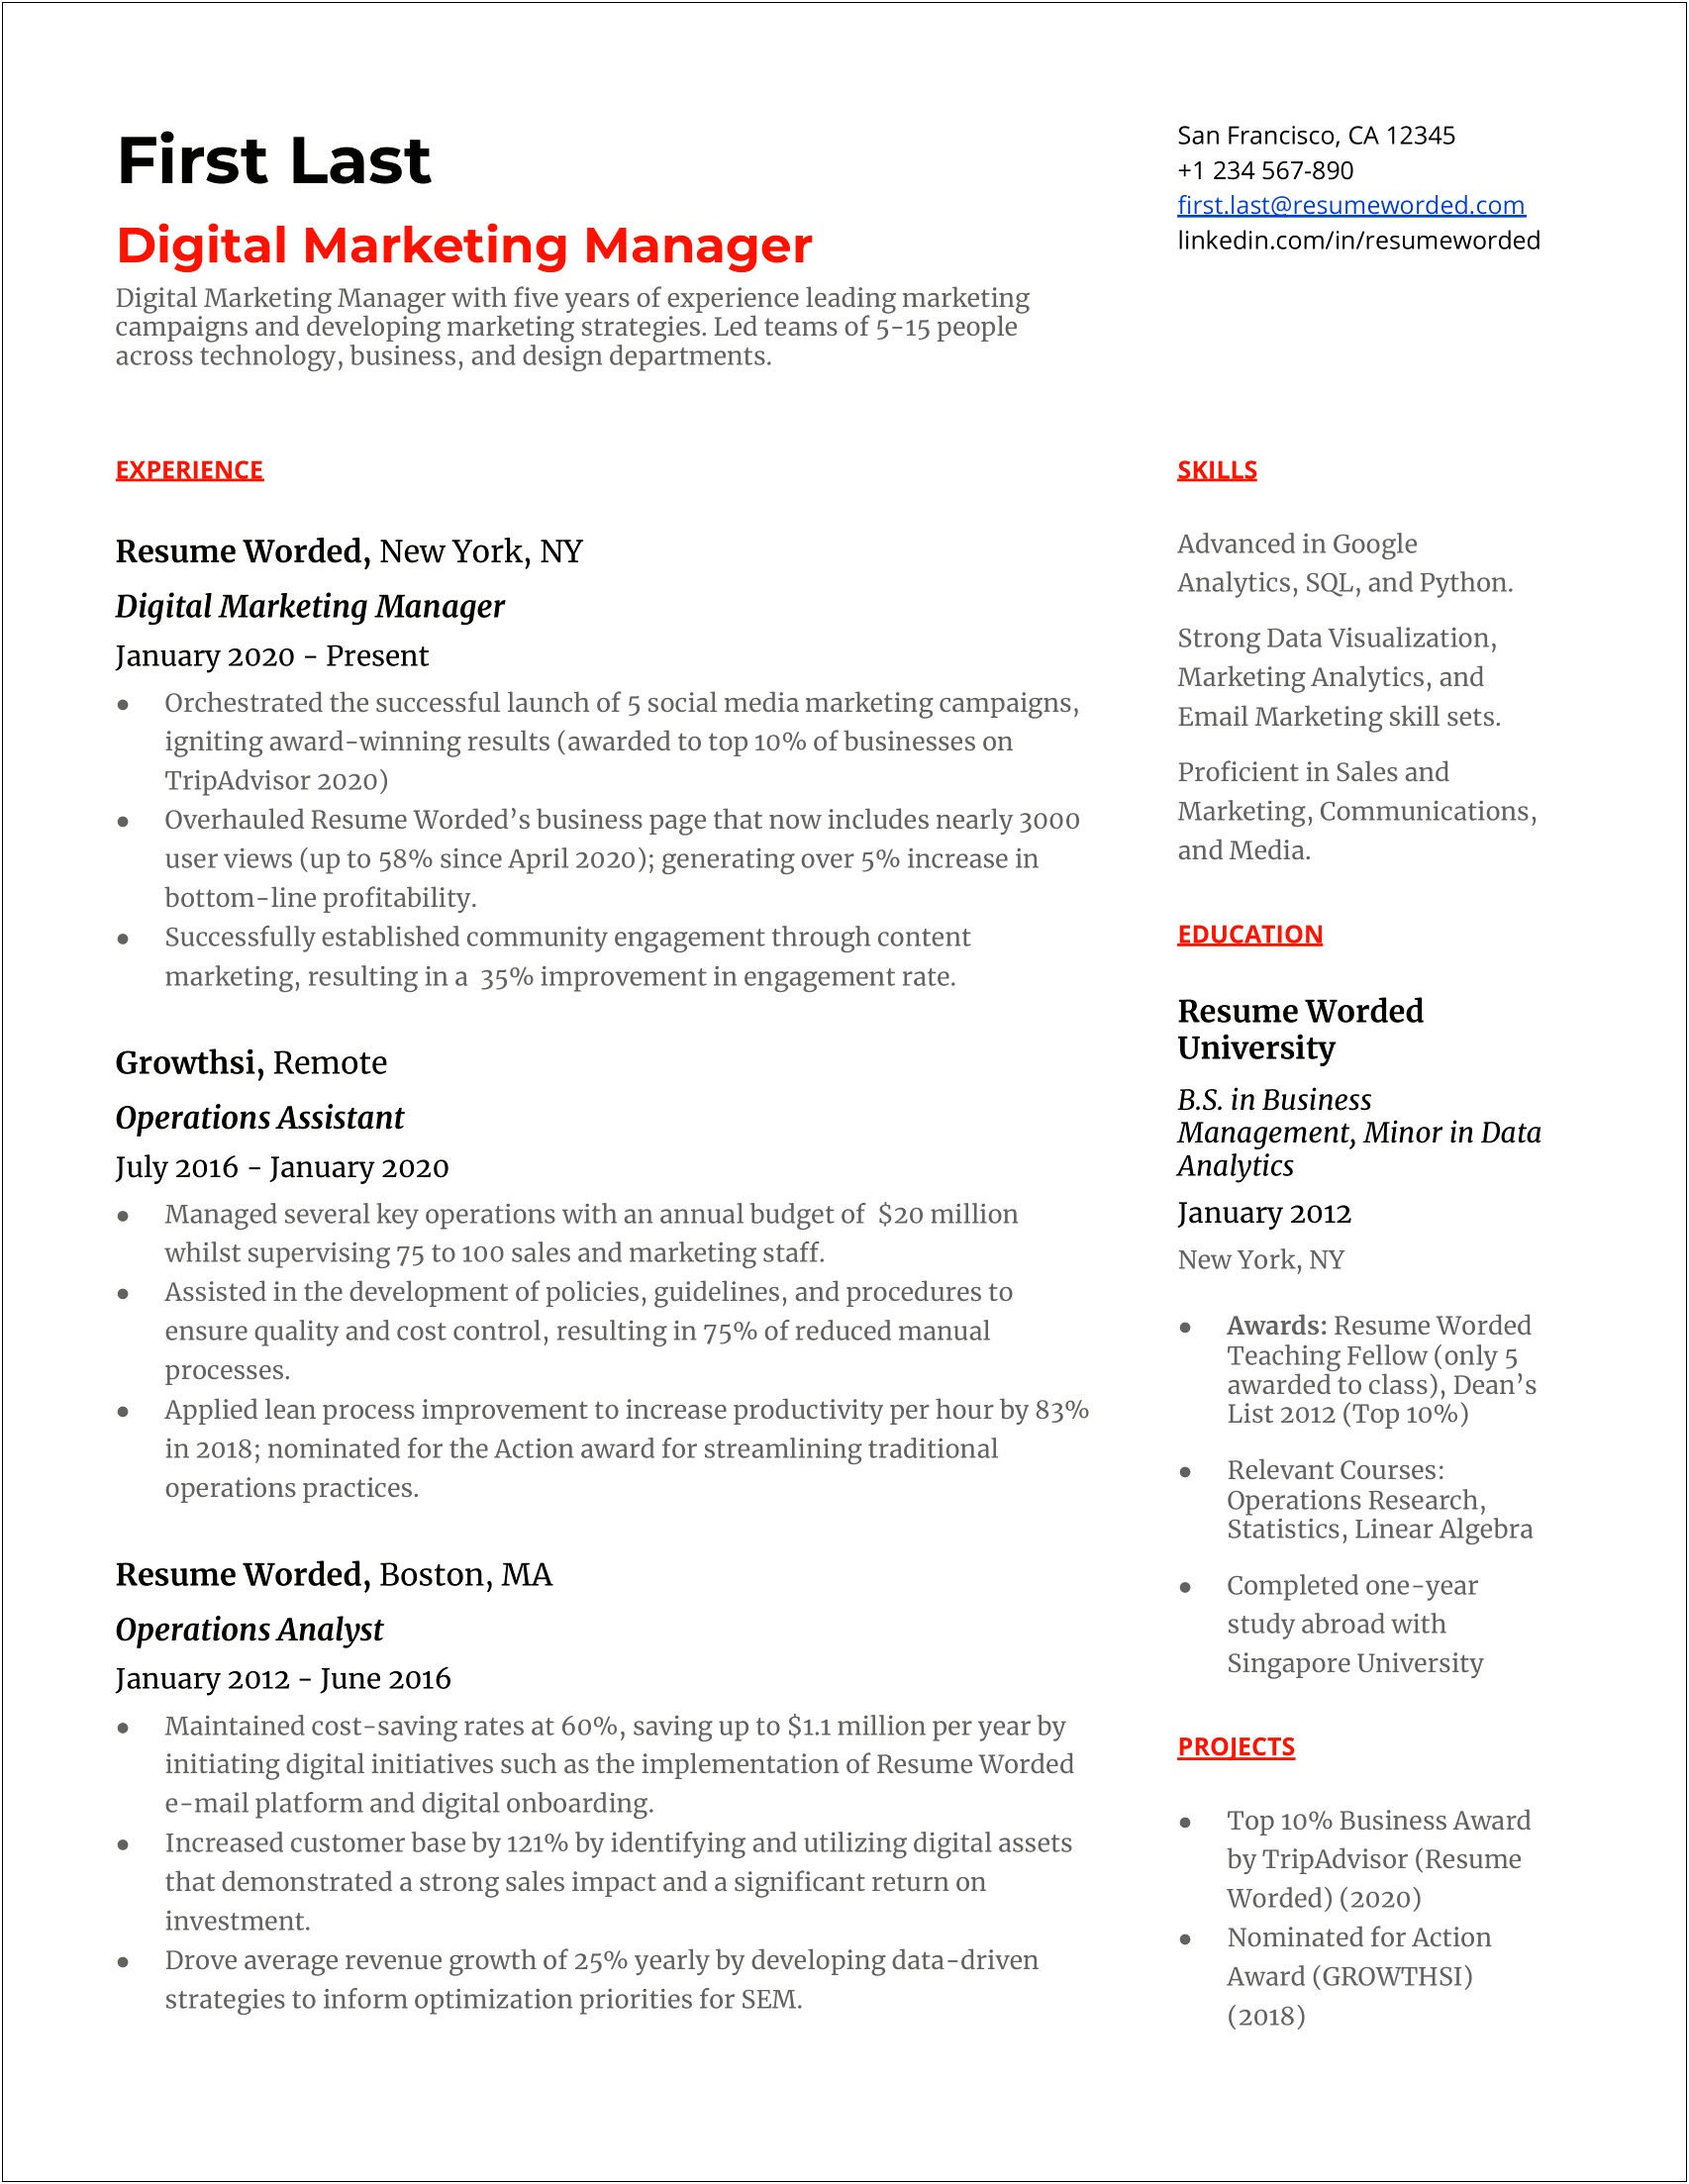 Resume Templates For Marketing Manager